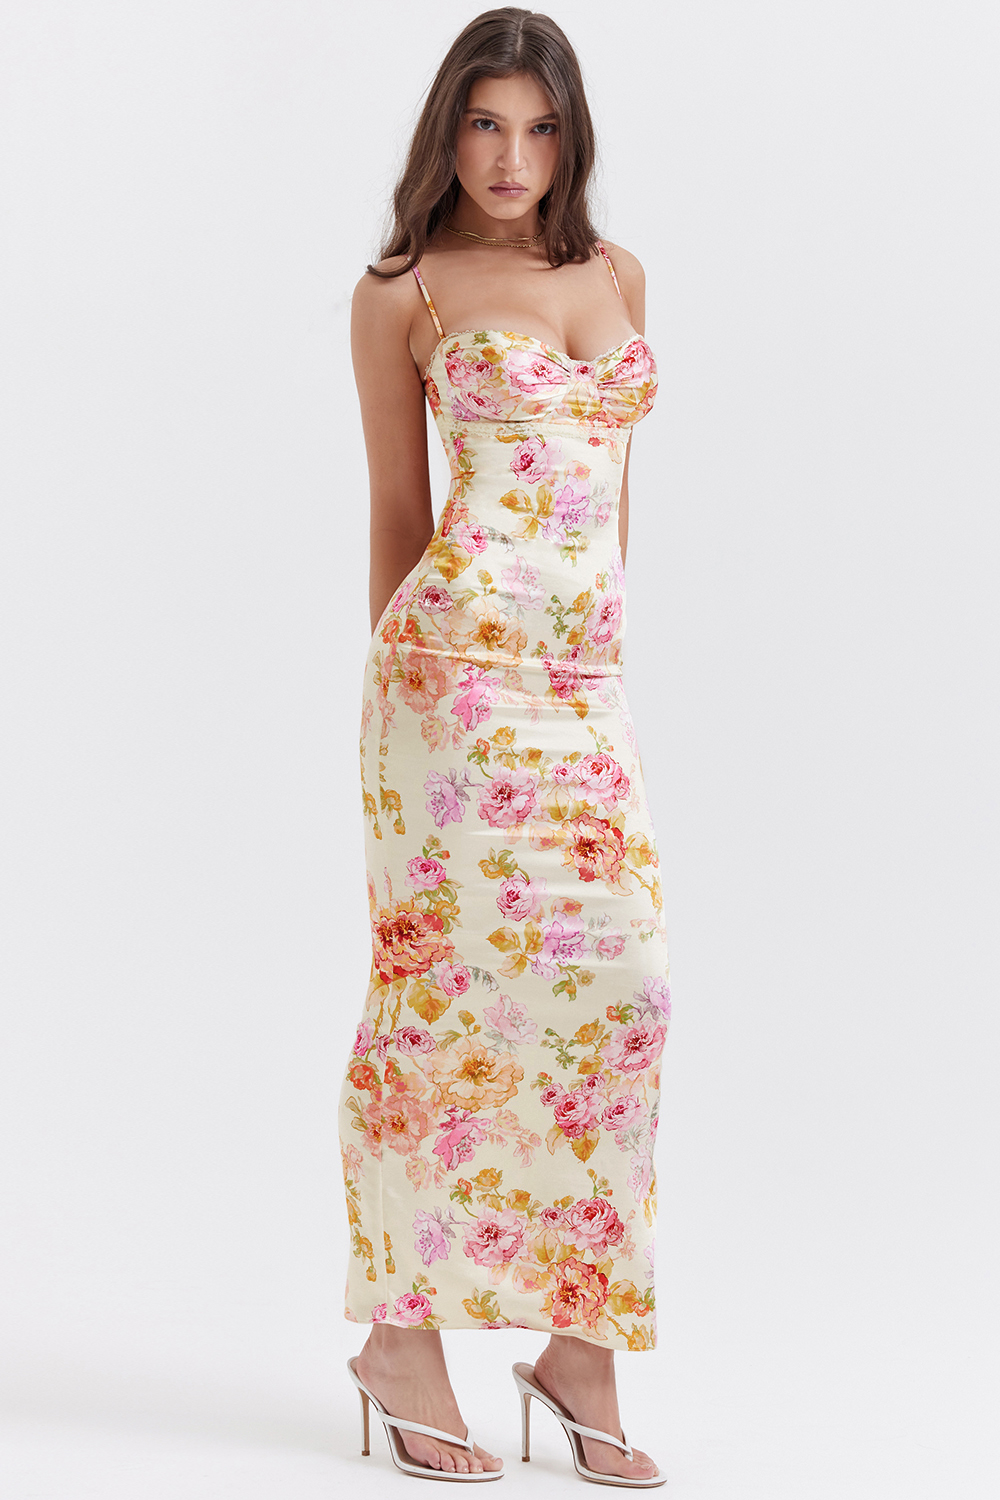 house of cb floral dress